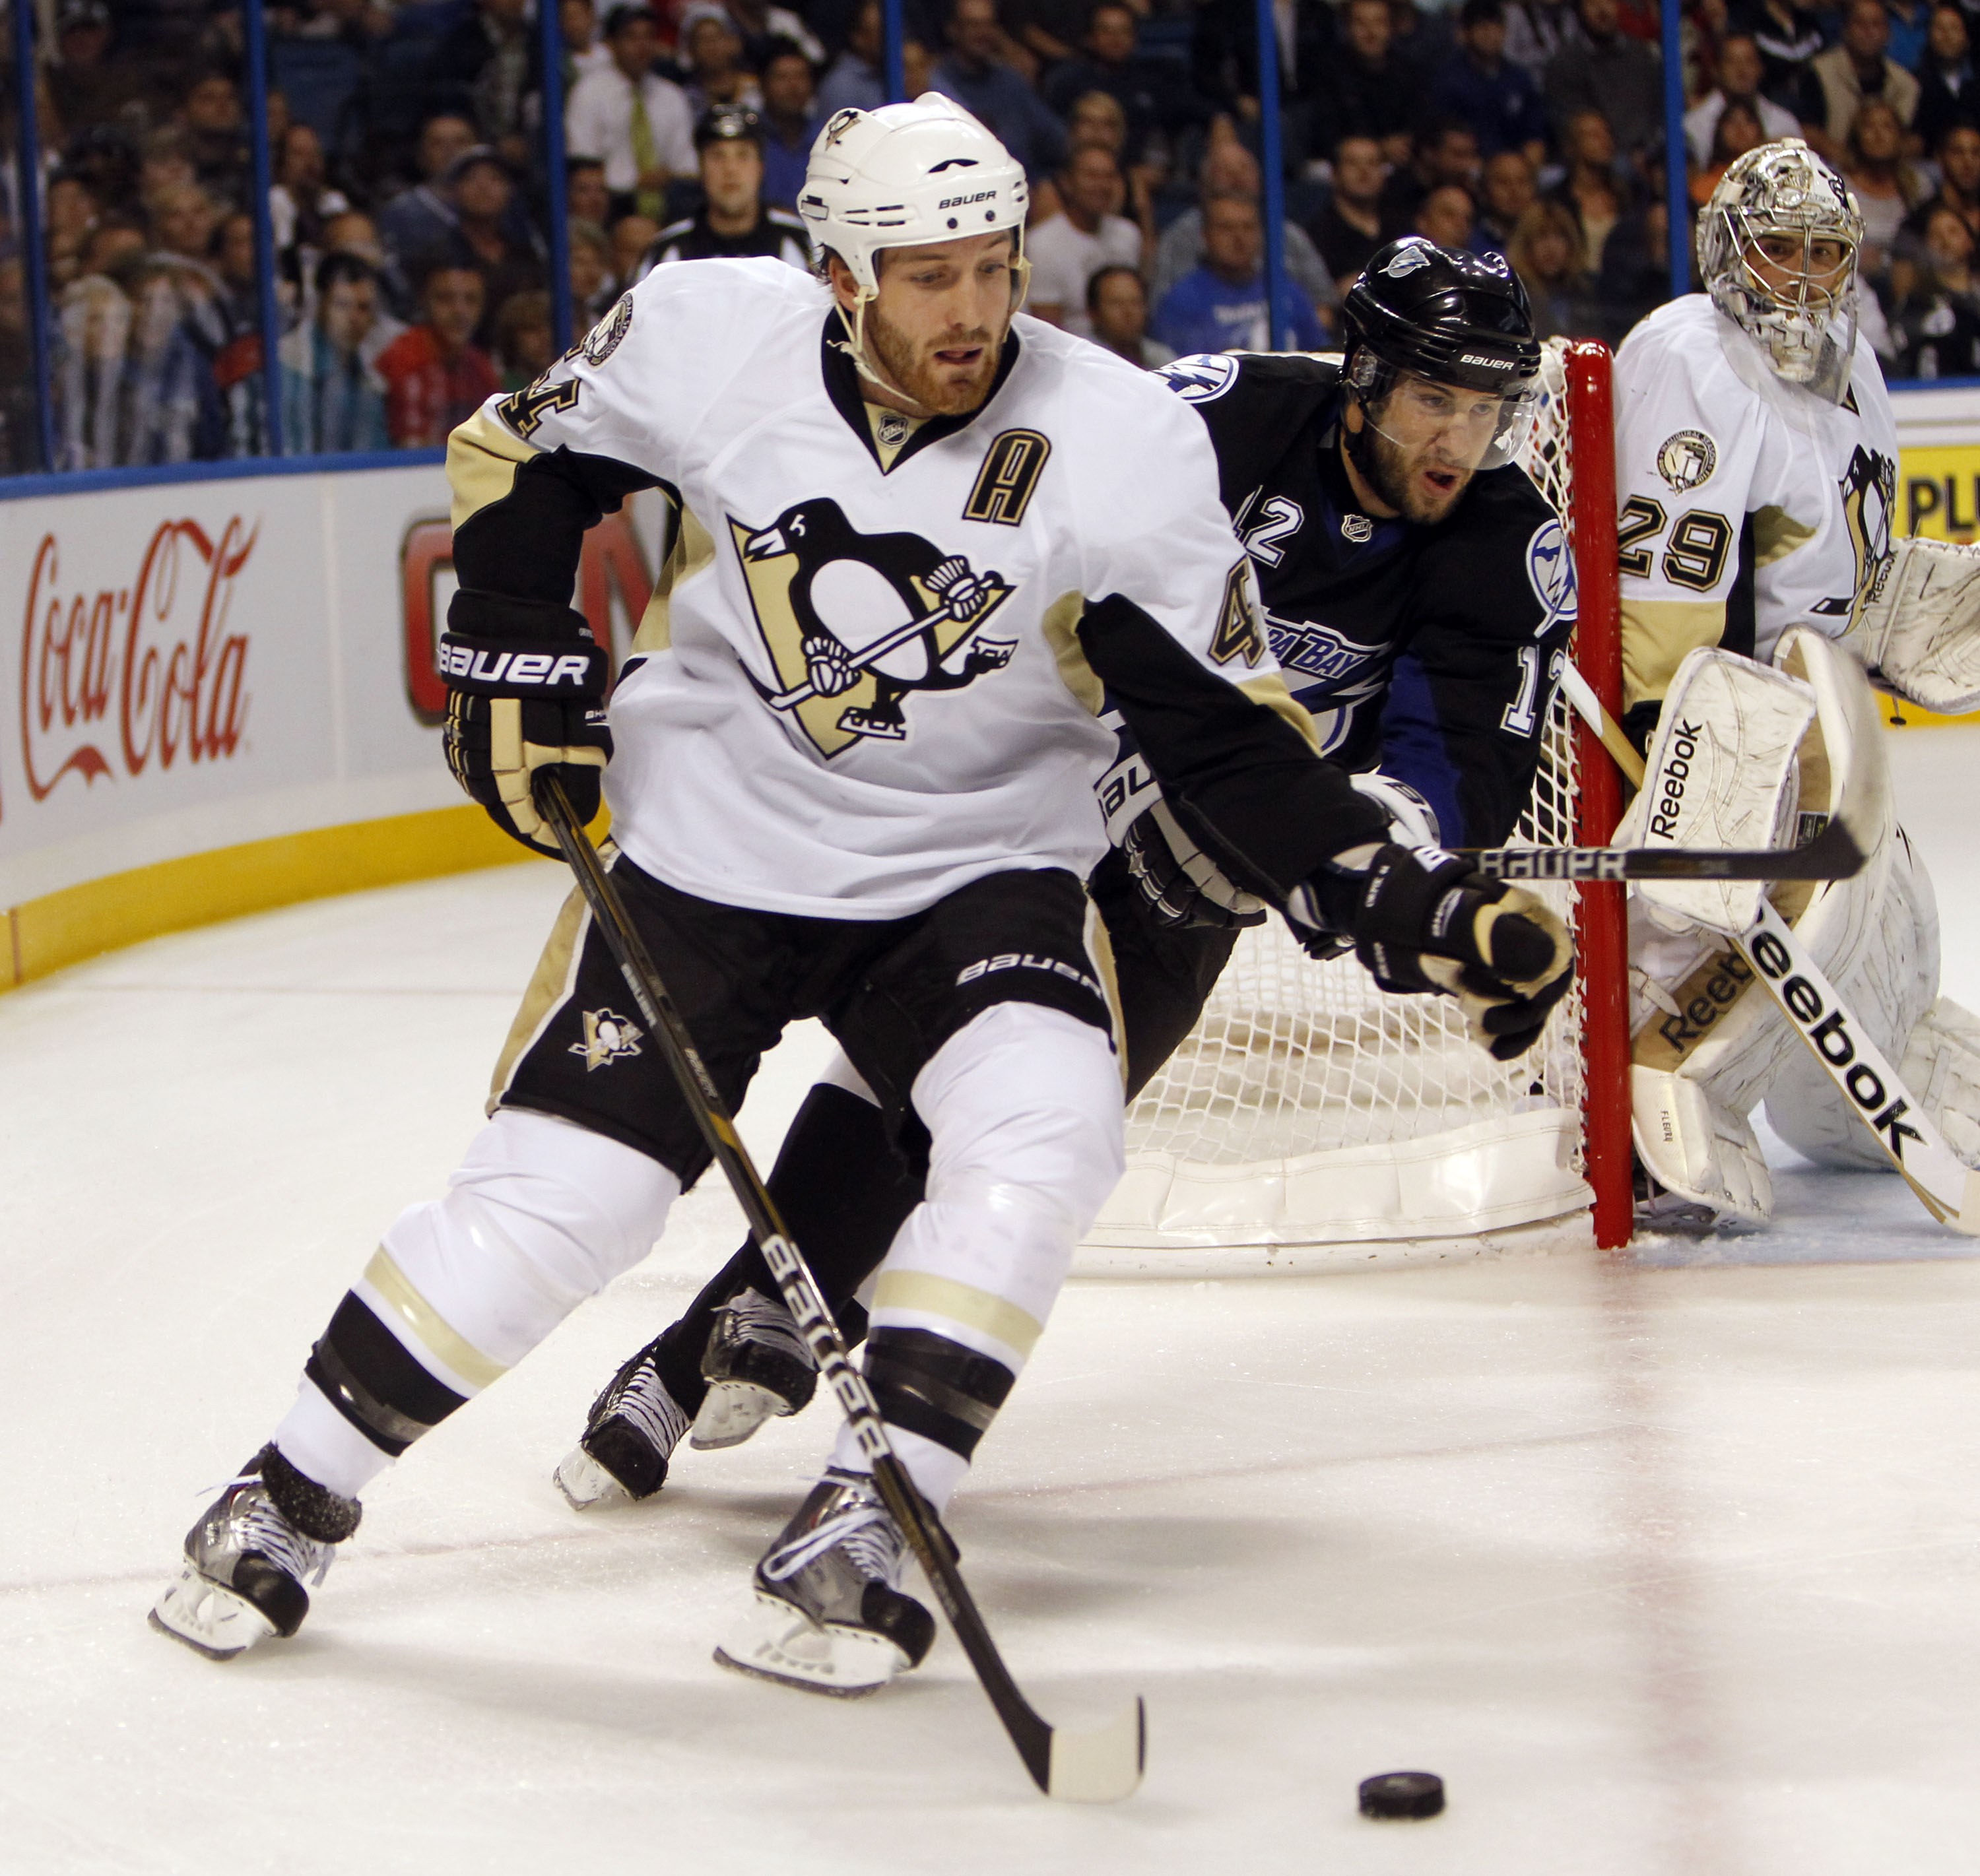 TAMPA, FL - APRIL 25: Brooks Orpik #44 of the Pittsburgh Penguins skates with the puck against Simon Gagne #12 of the Tampa Bay Lightning in Game Six of the Eastern Conference Quarterfinals during the 2011 NHL Stanley Cup Playoffs at the St. Pete Times Fo